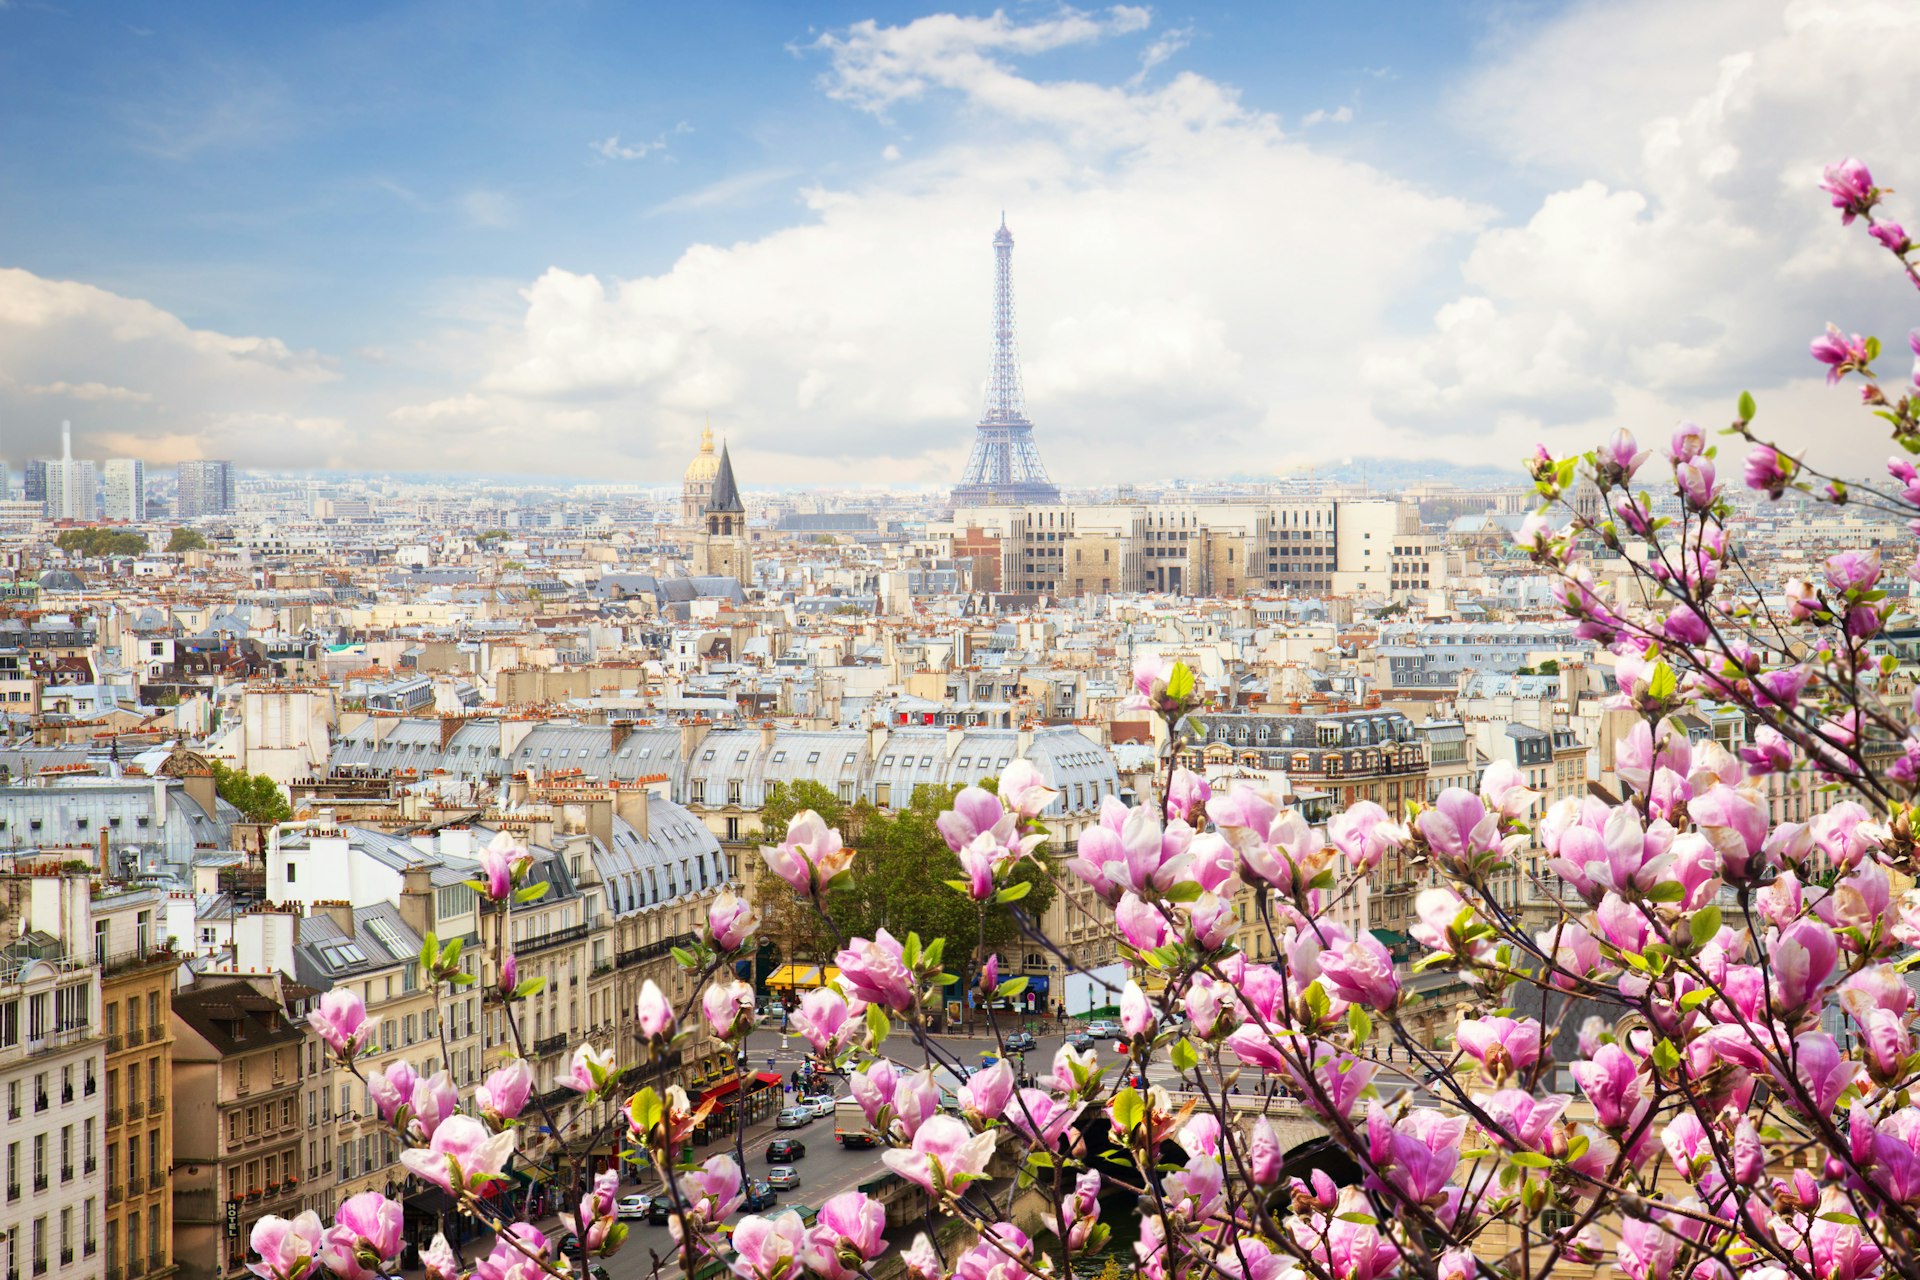 The skyline of Paris with the Eiffel Tower and blooming magnolia